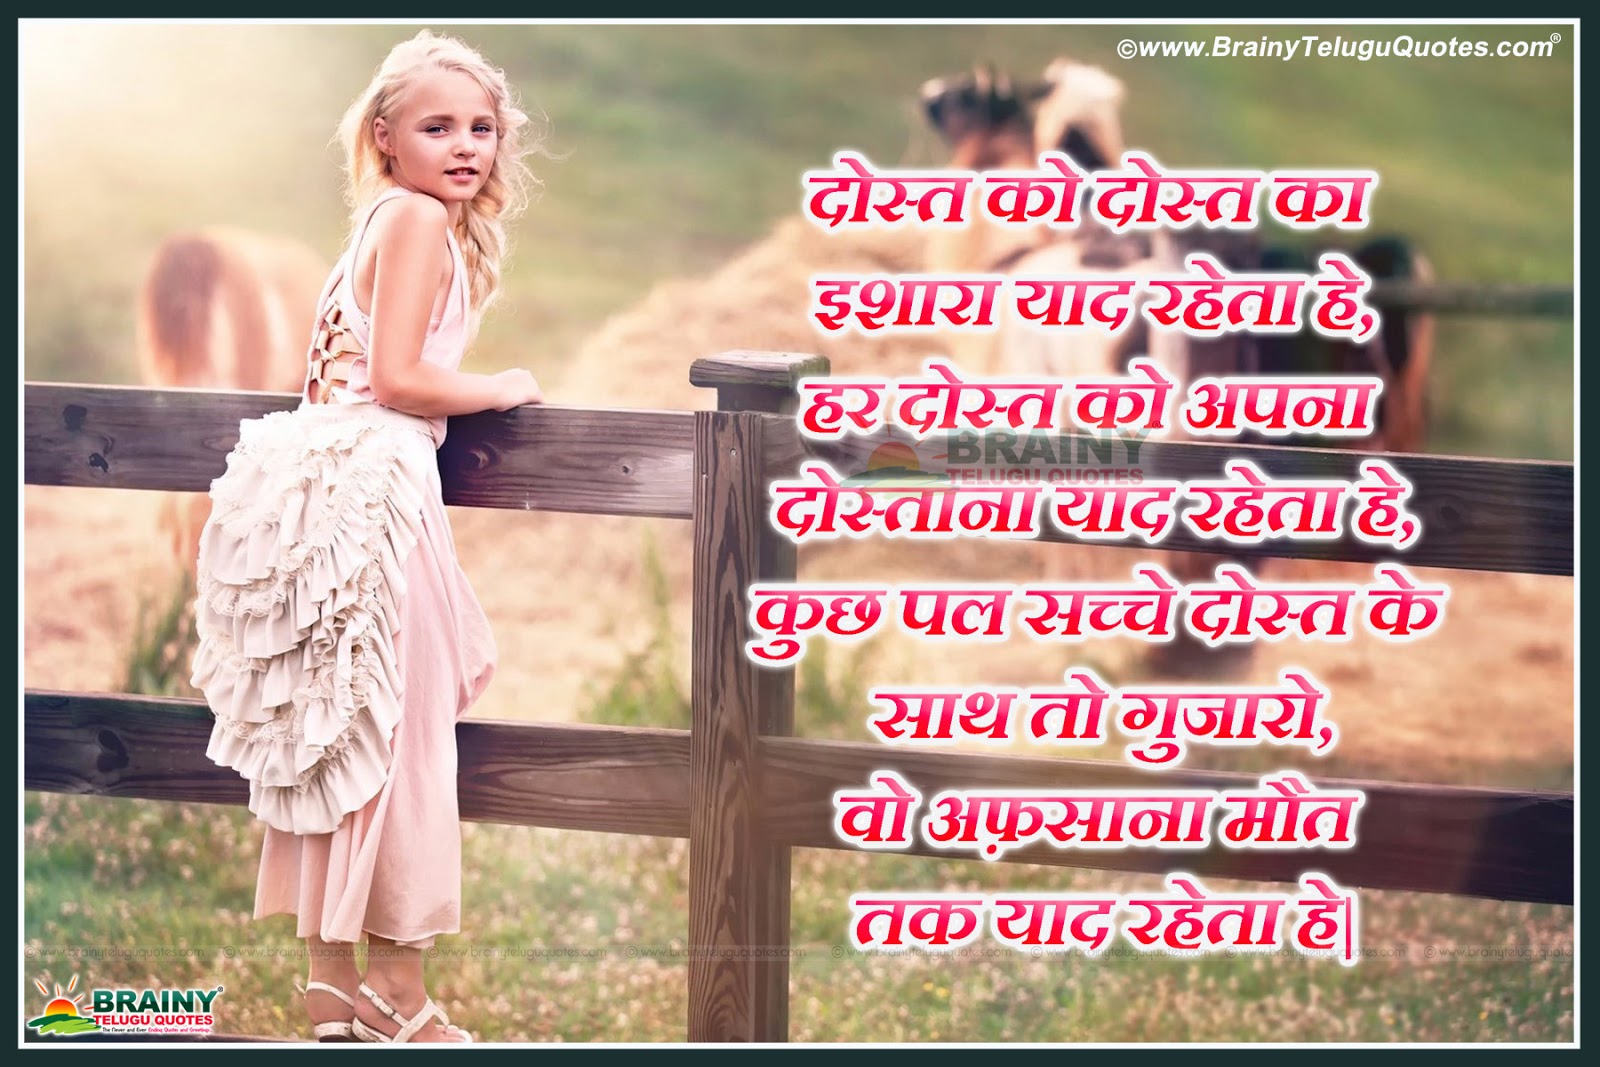 Here is a Latest Hindi Language New True Friendship dosti Shayari and Wallpapers Daily